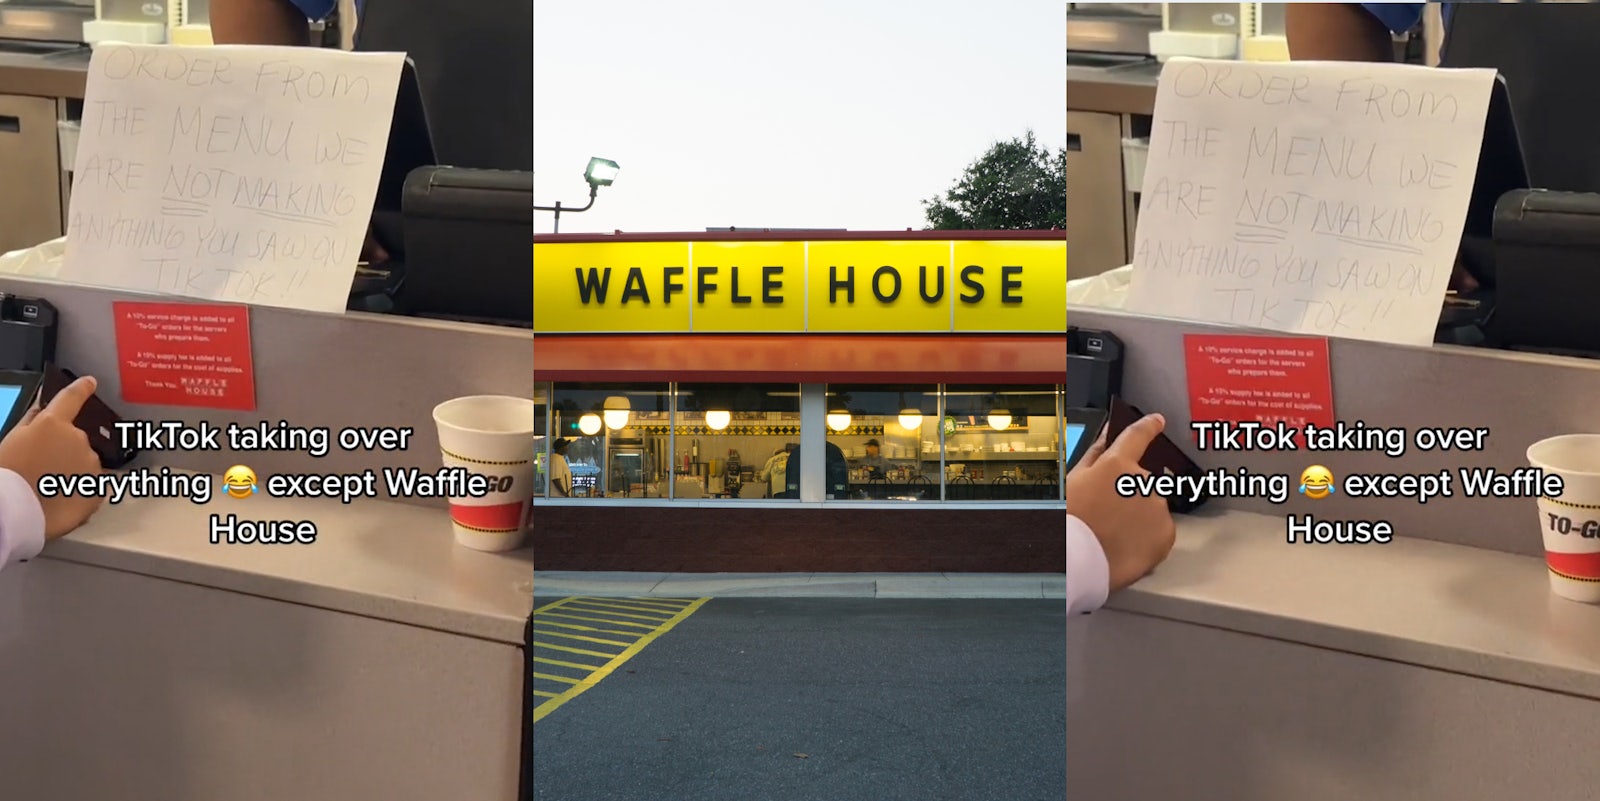 Waffle House counter with handwritten sign 'ORDER FROM THE MENU WE ARE NOT MAKING ANYTHING YOU SAW ON TIKTOK' 'and caption 'TikTok taking over everything except Waffle House' (l) Waffle house building with sign (c) Waffle House counter with handwritten sign 'ORDER FROM THE MENU WE ARE NOT MAKING ANYTHING YOU SAW ON TIKTOK' 'and caption 'TikTok taking over everything except Waffle House' (r)